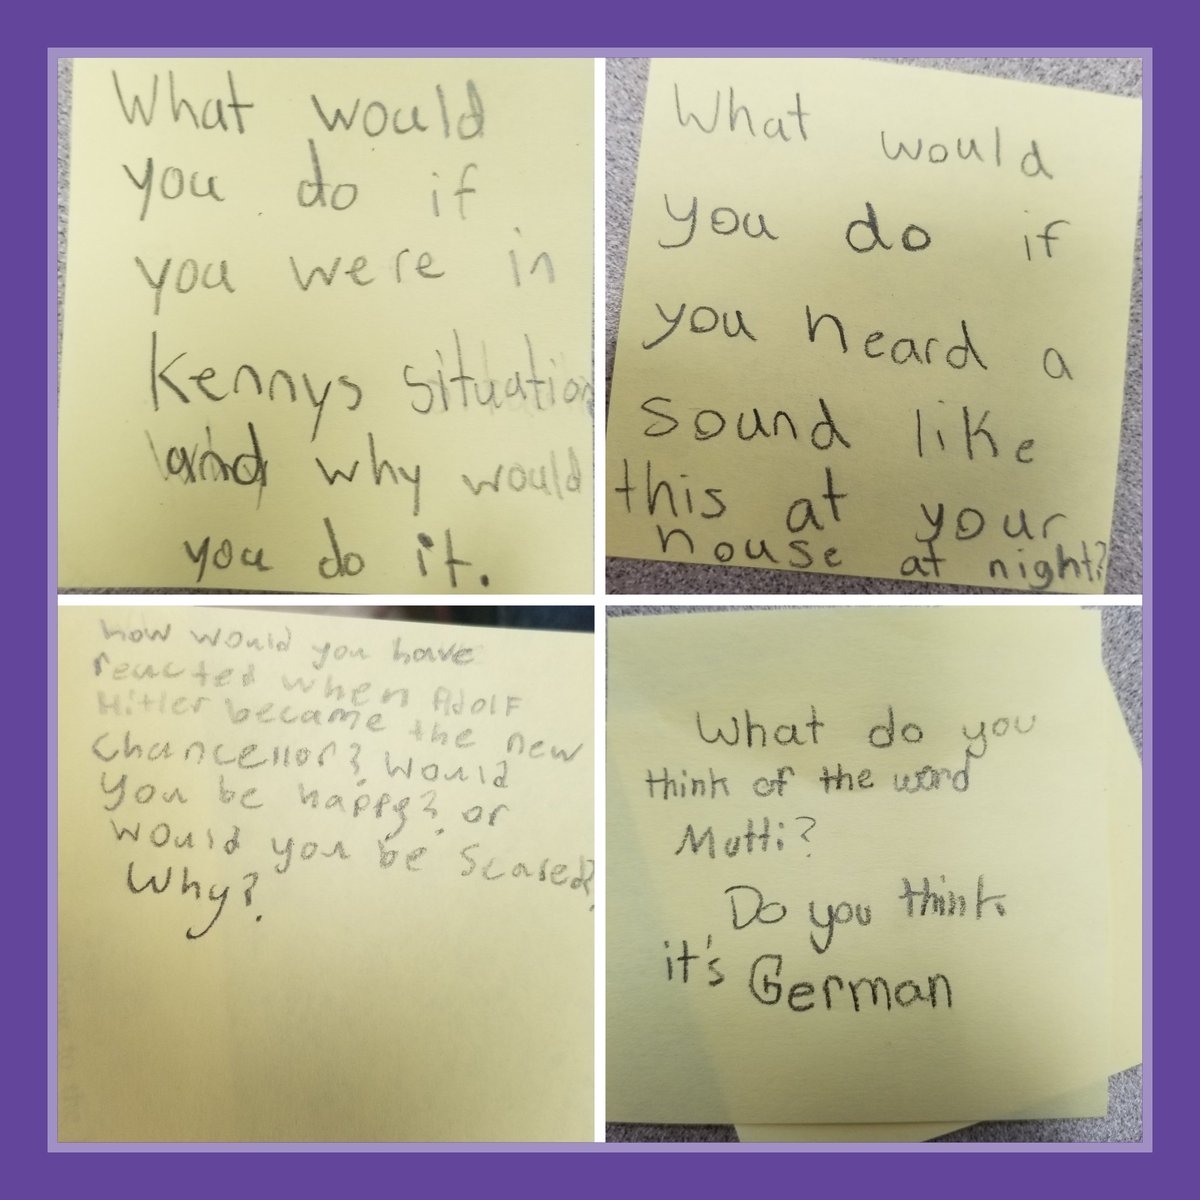 4th grade Heroes select their own book sets and create their own questions to discuss in literature circles. #TeamSISD #PHEHeroesBelieve #unstoppable #choiceandvoice  @PHeart_ES @CCastanos_PHES